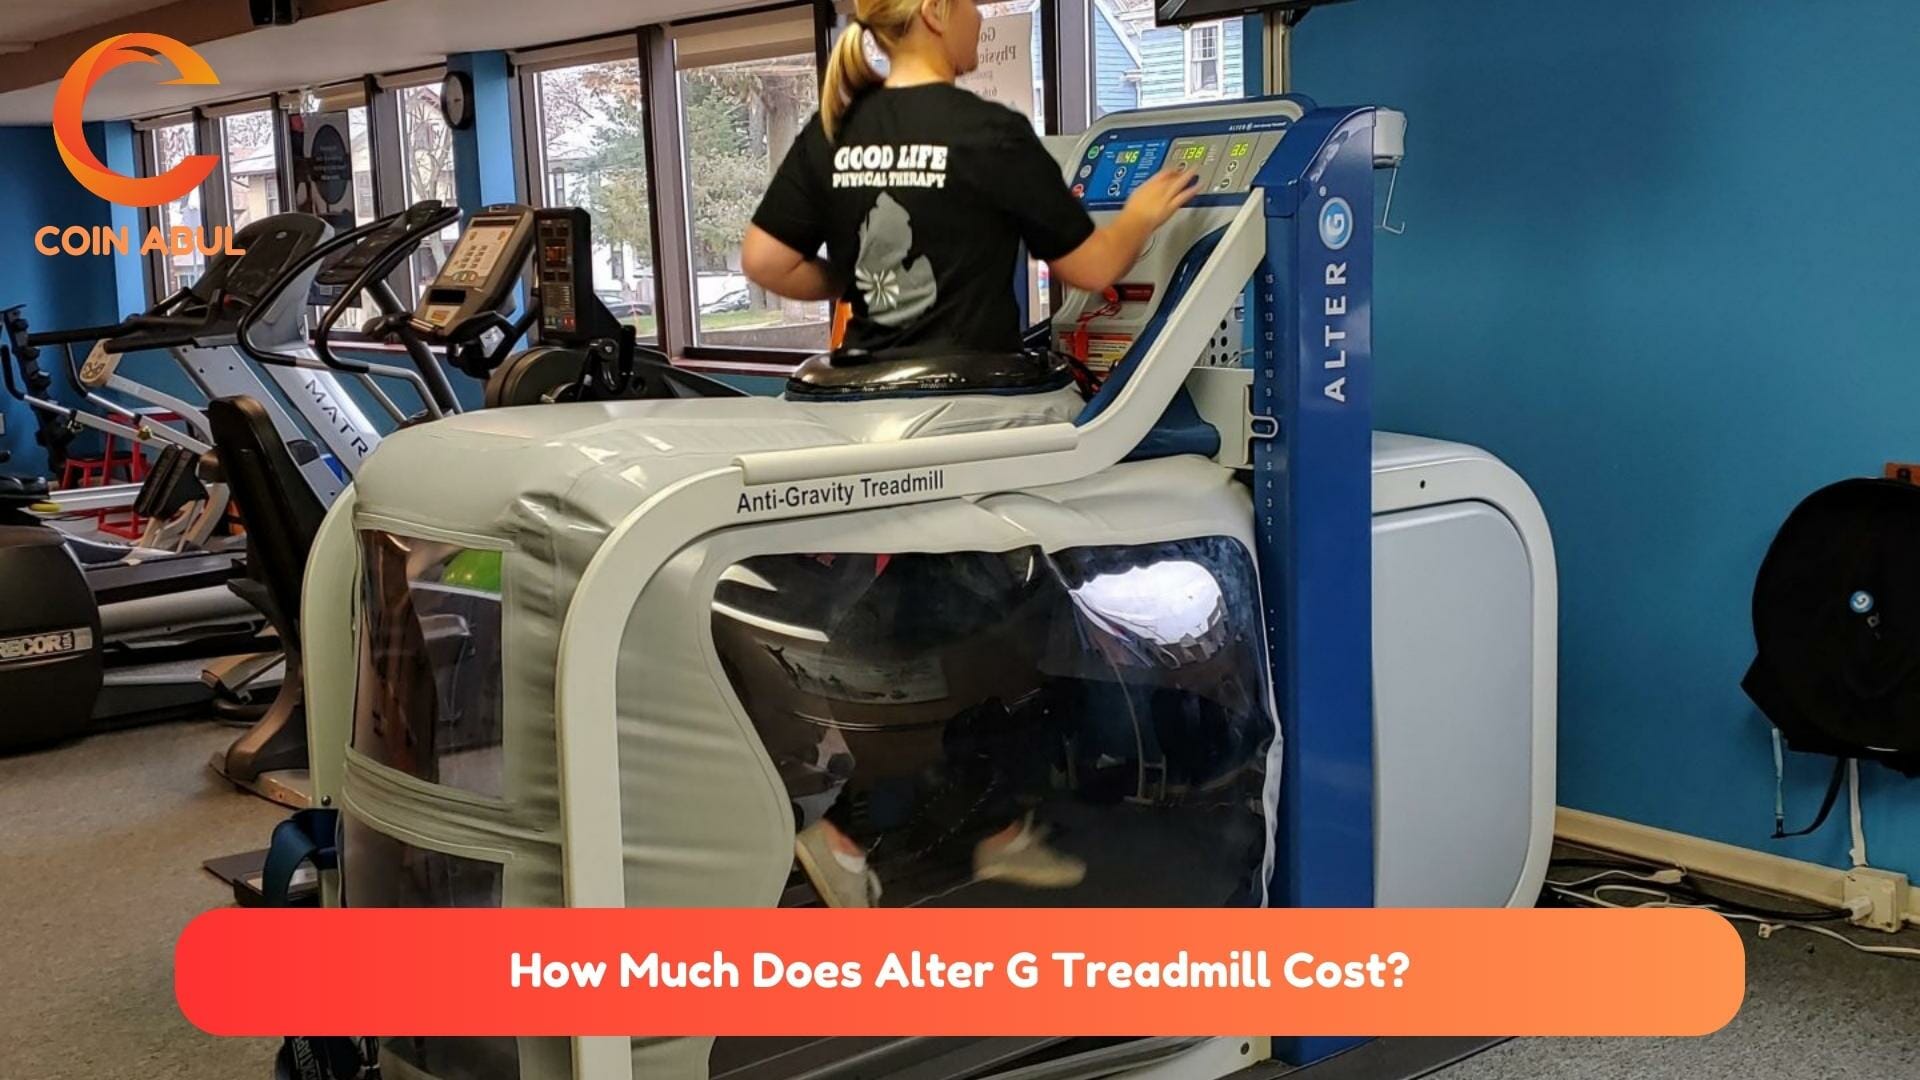 How Much Does Alter G Treadmill Cost